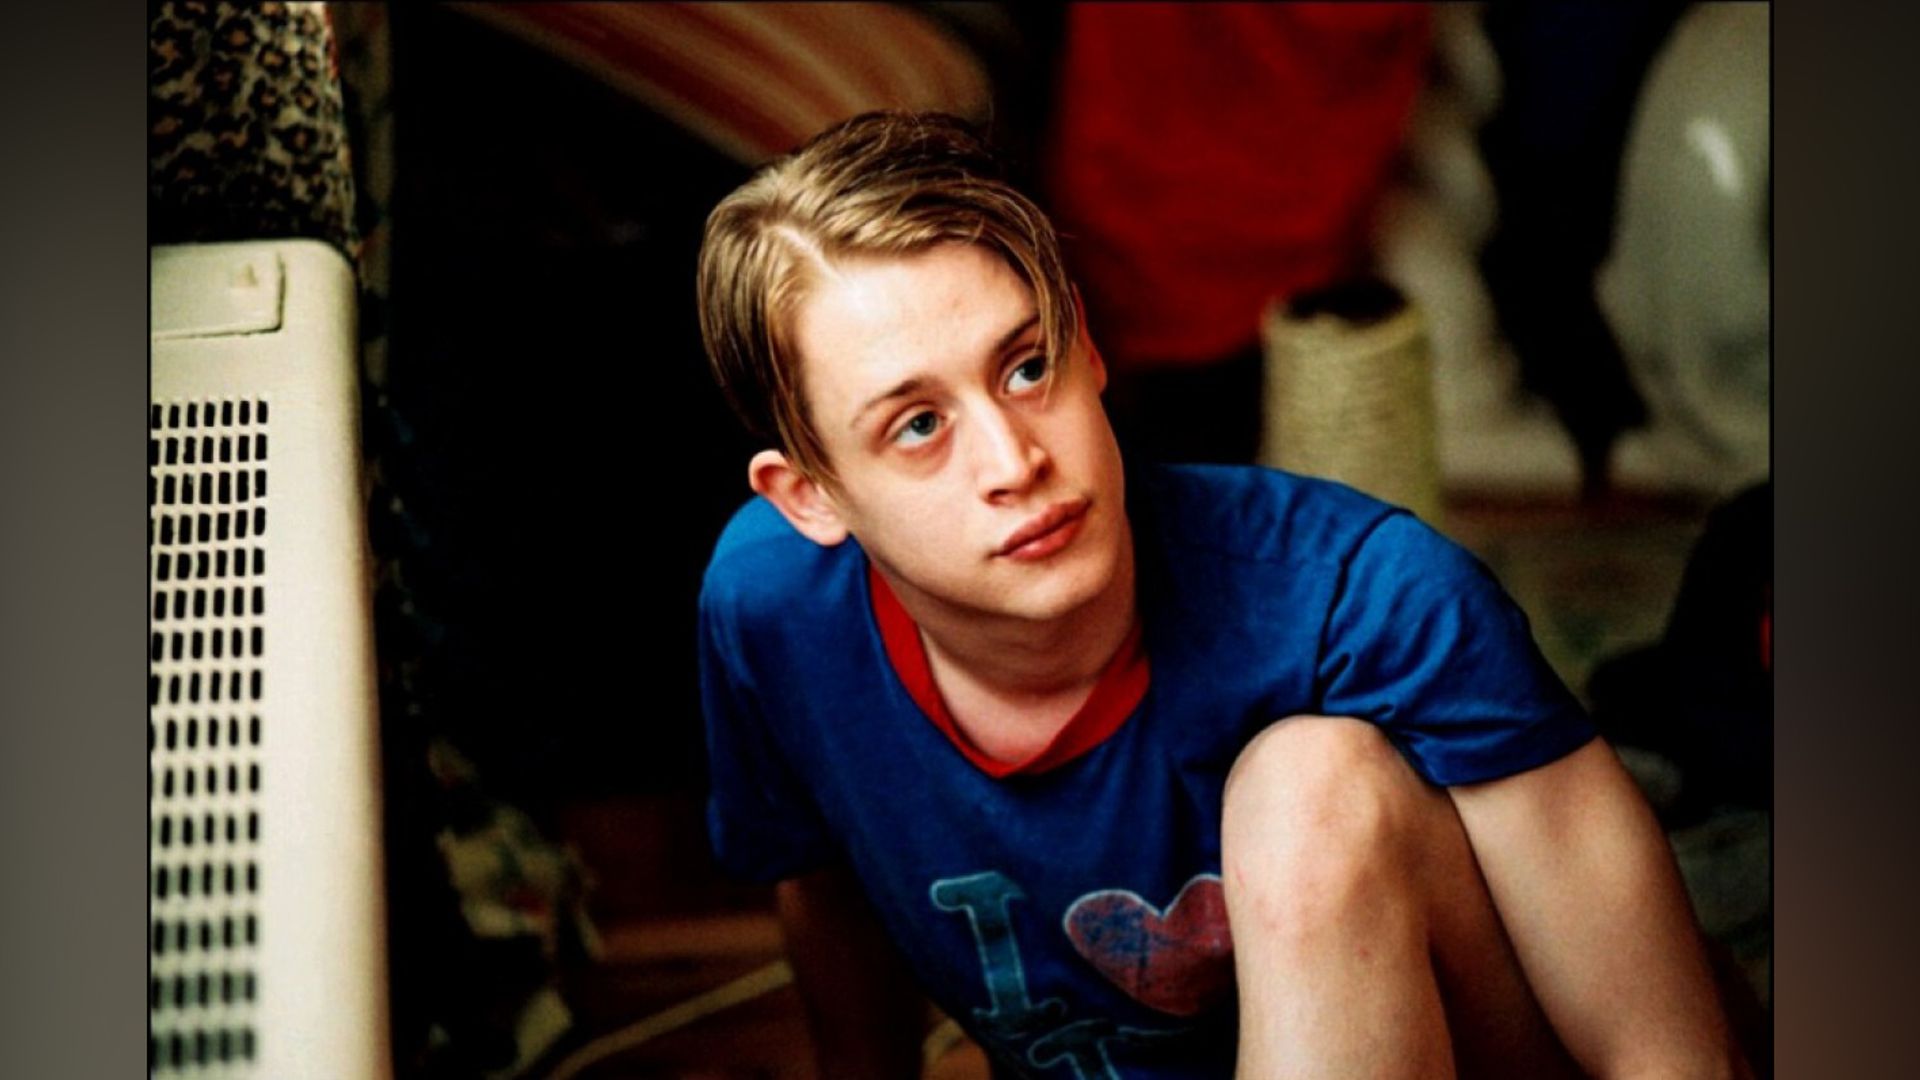 Macaulay Culkin in the movie 'Party Monster'